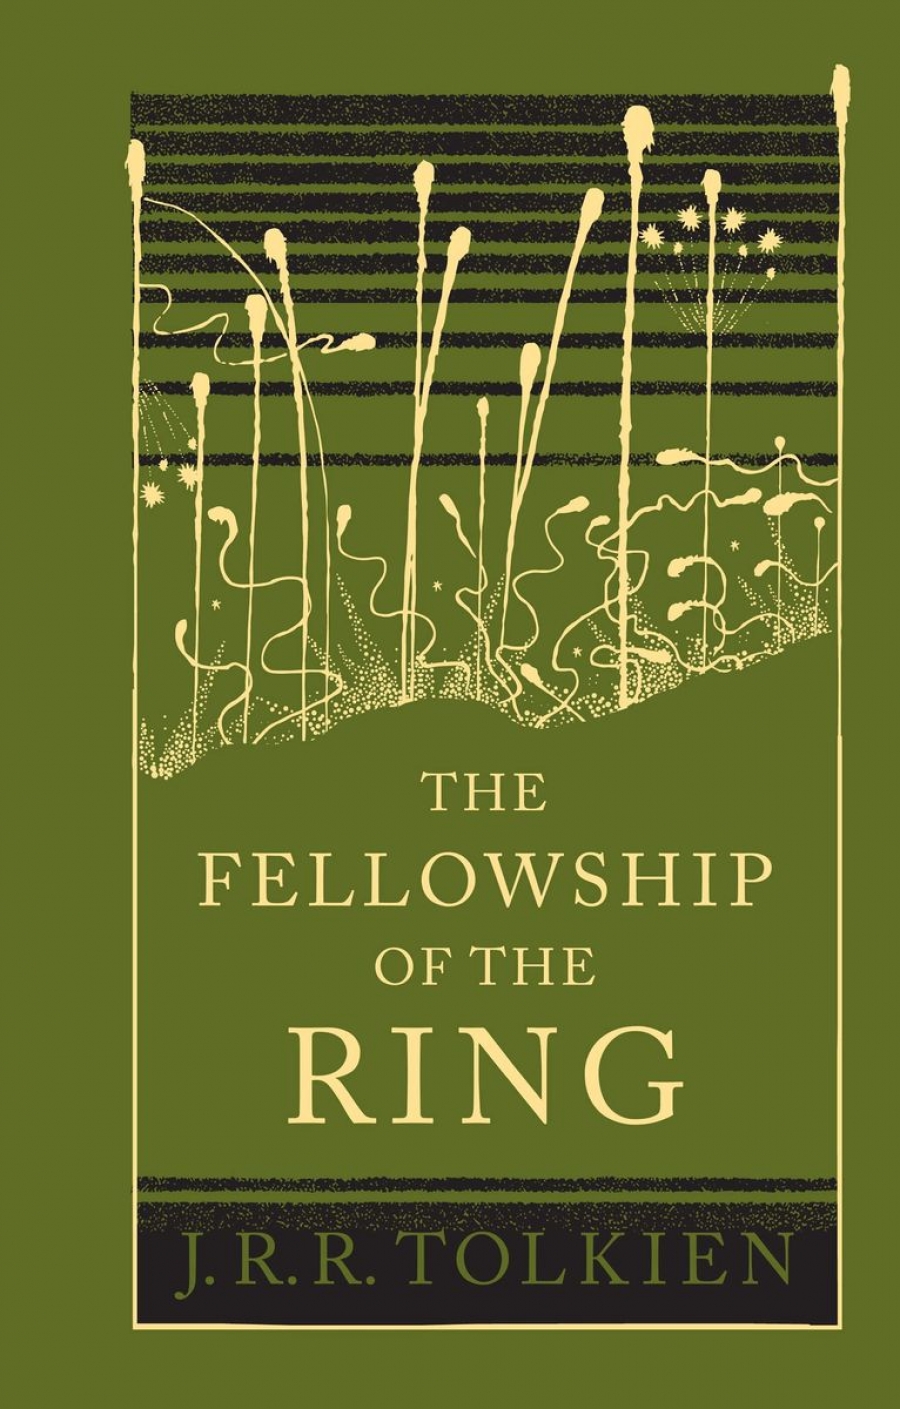 Tolkien J.R.R. The Fellowship of the Ring: Book 1 